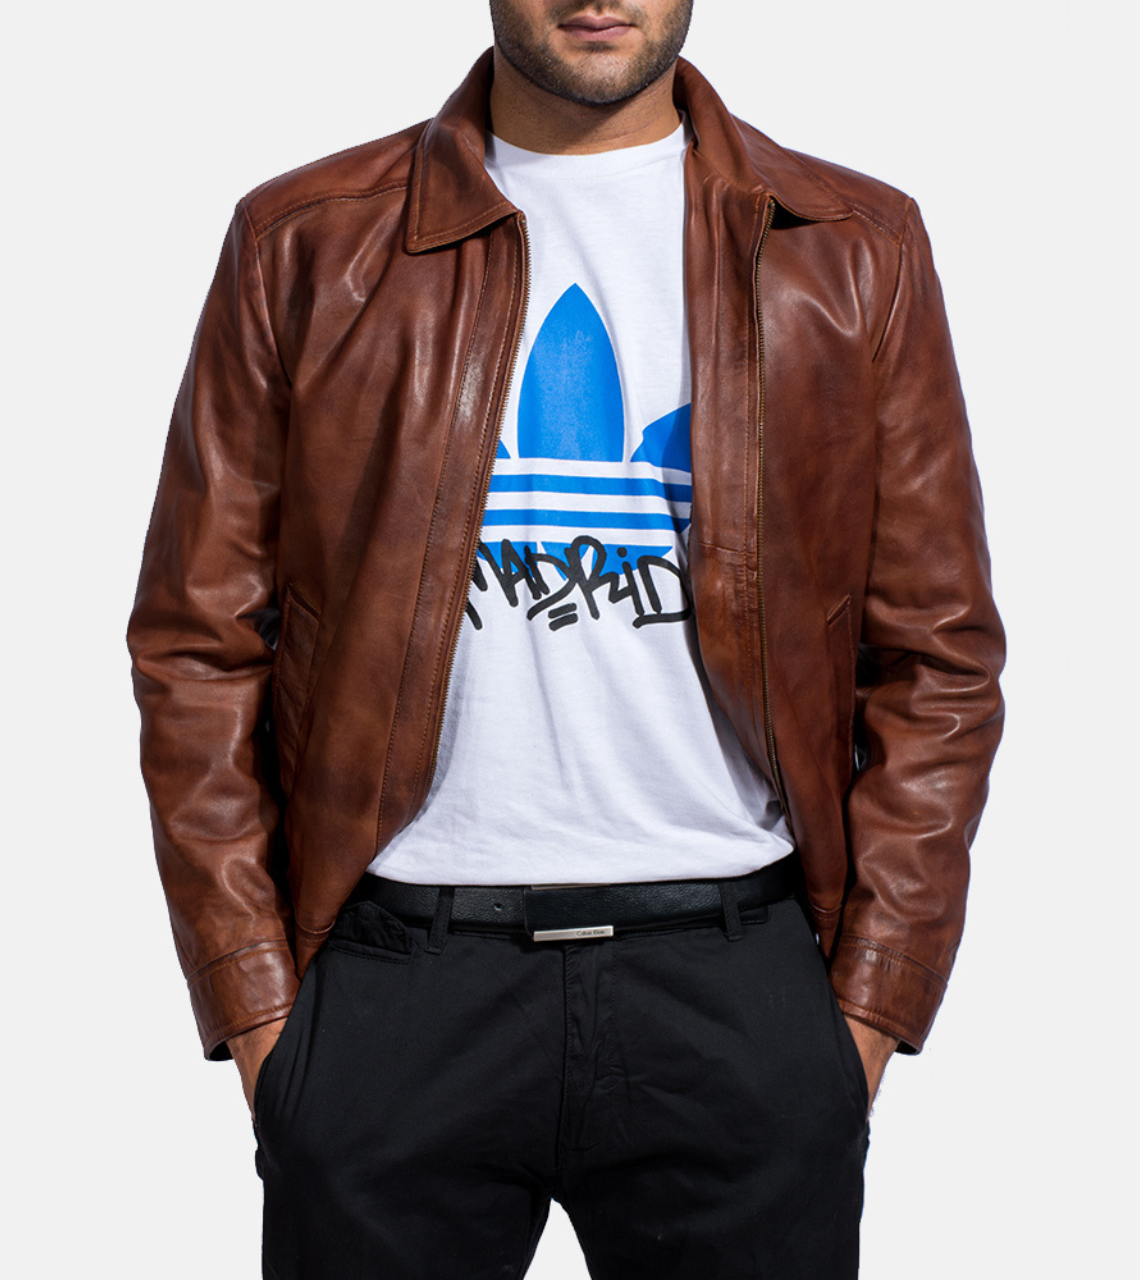 Wick Inspired Brown Leather Jacket For Men's